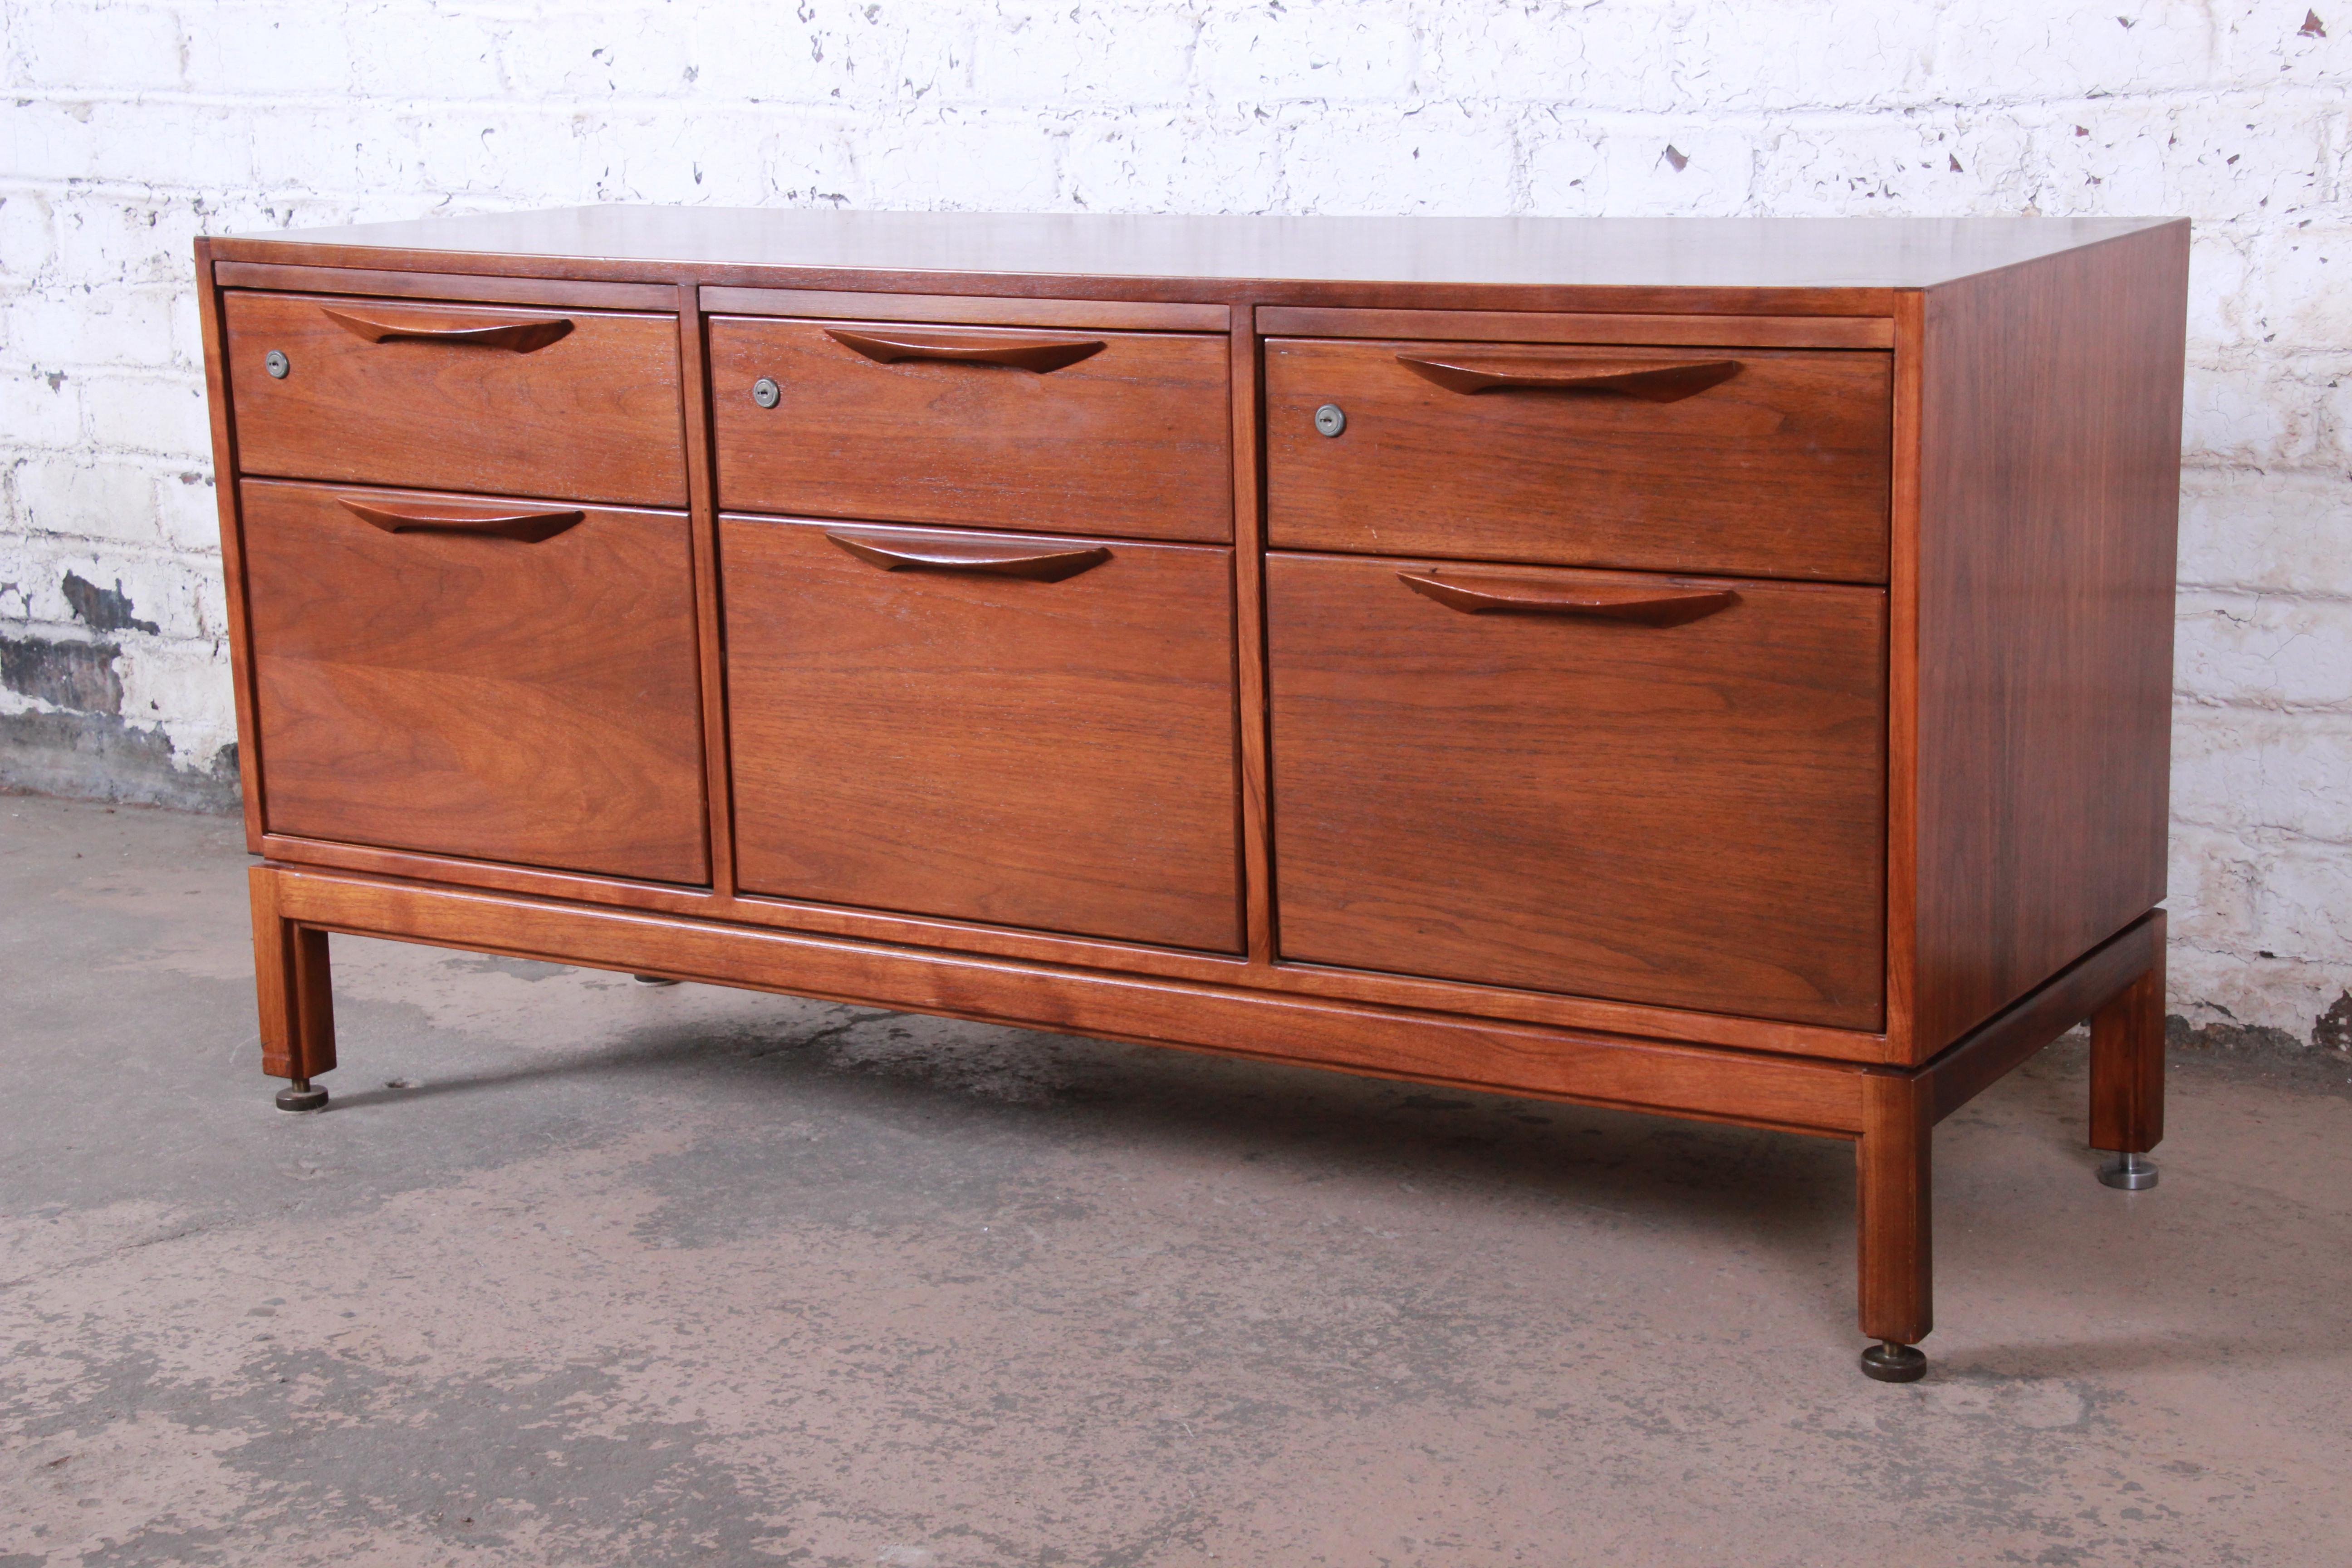 An exceptional Mid-Century Modern walnut credenza designed by Jens Risom. The credenza features stunning walnut wood grain and sleek midcentury Danish-inspired design. It offers ample storage, with six dovetailed drawers each with solid sculpted